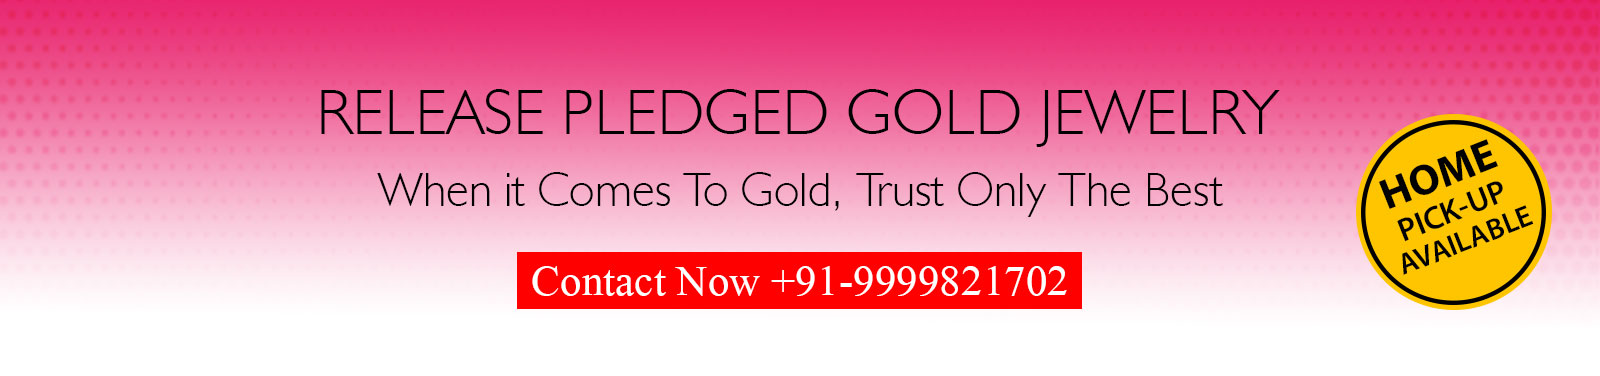 Best-place-To-Sell-Gold-Jewellery-for-Cash